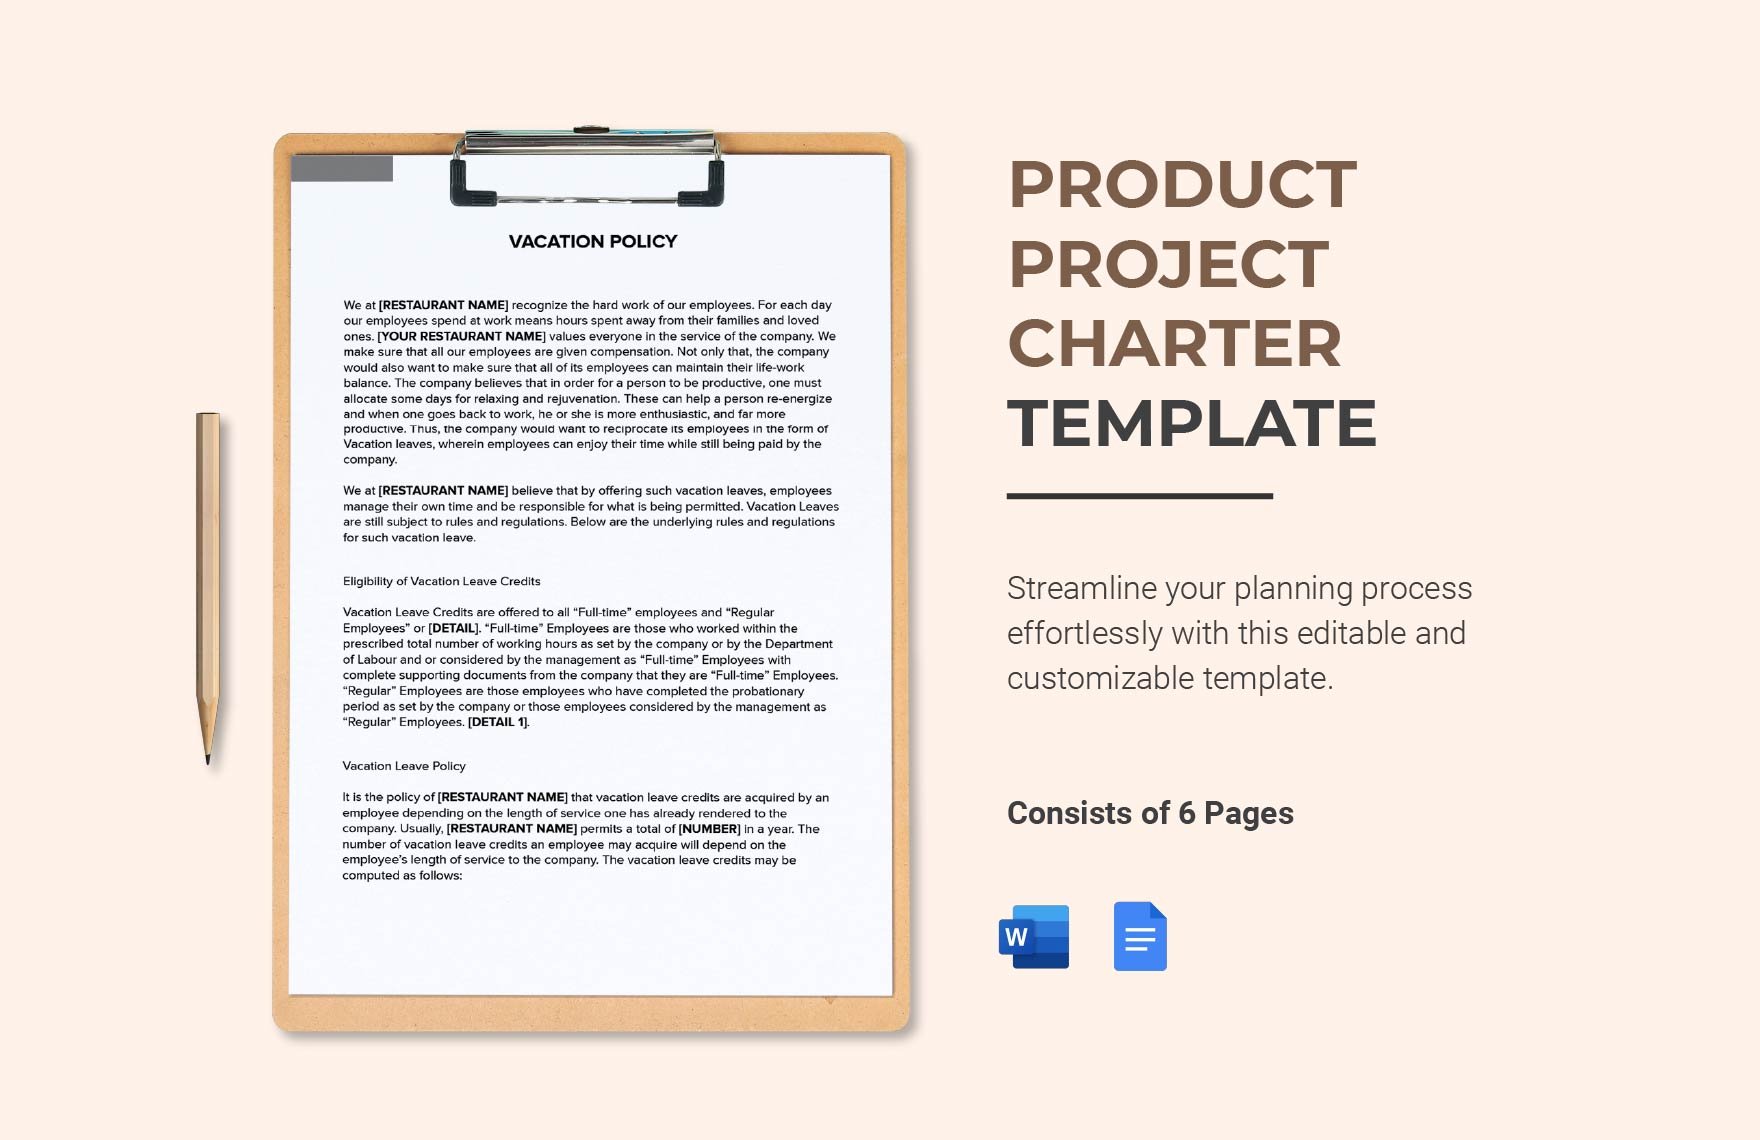 Product Project Charter Template in Word, Google Docs